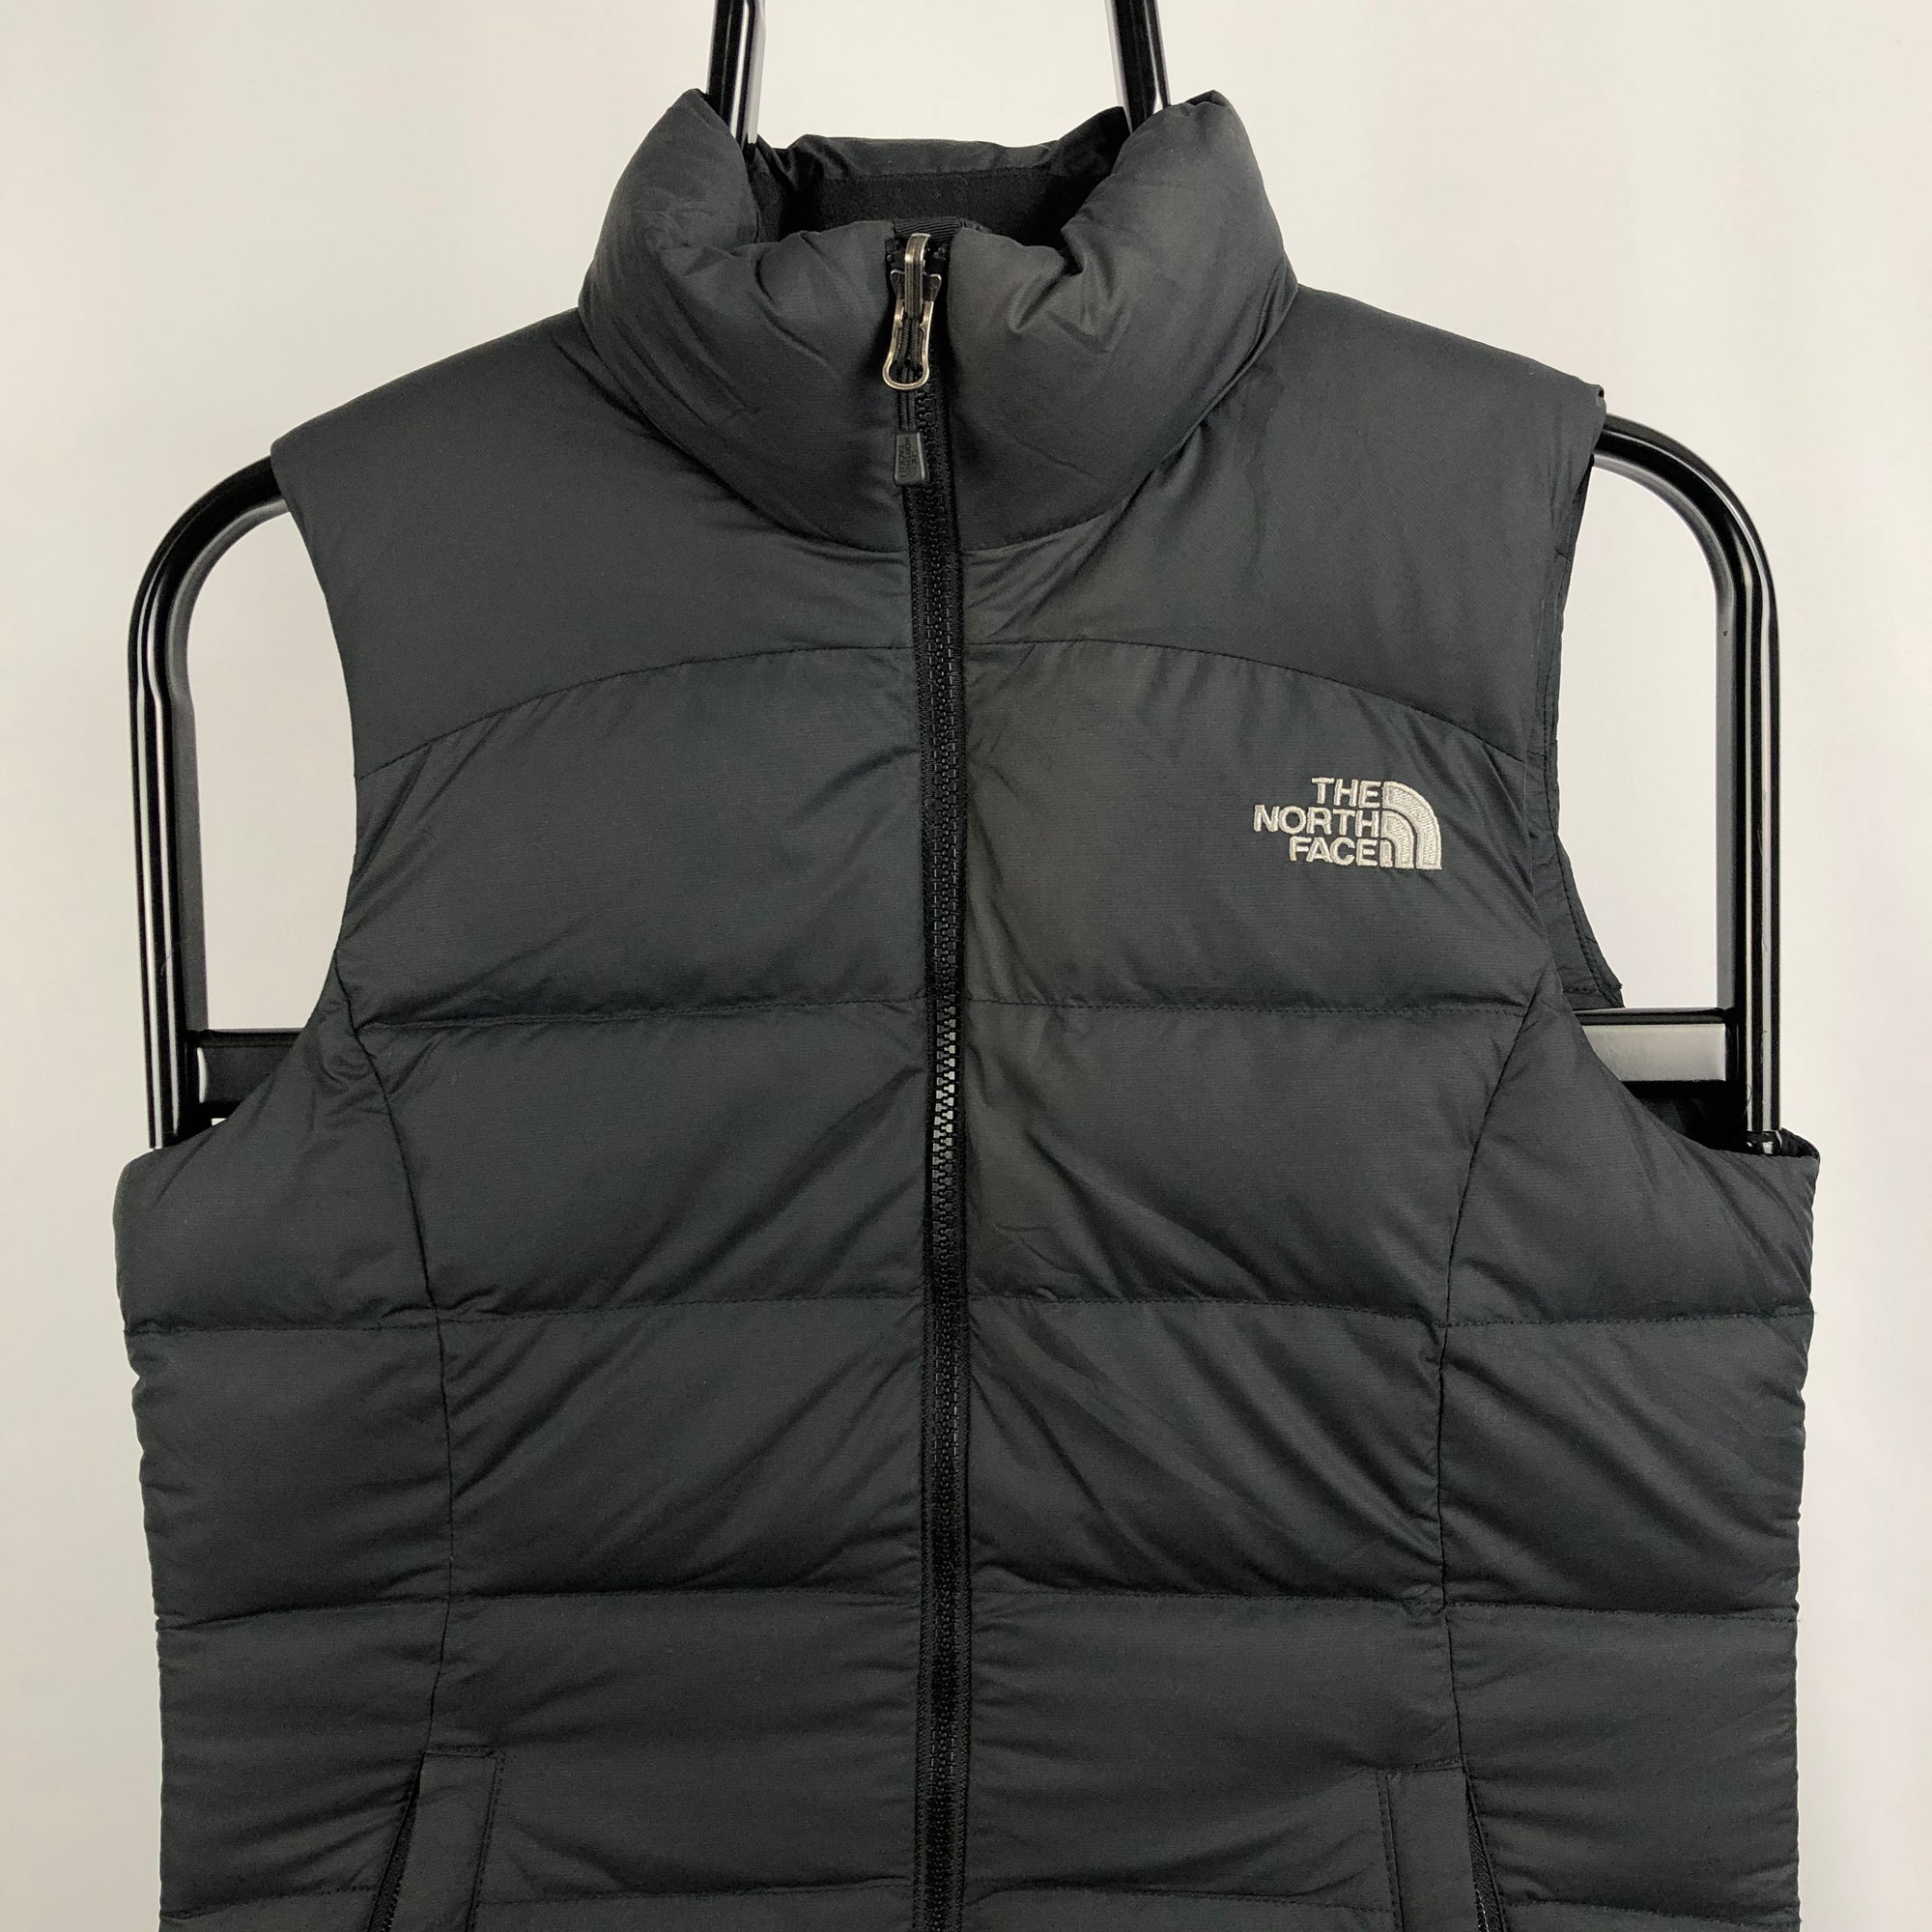 The North Face 700 Gilet in Black - Women's XS